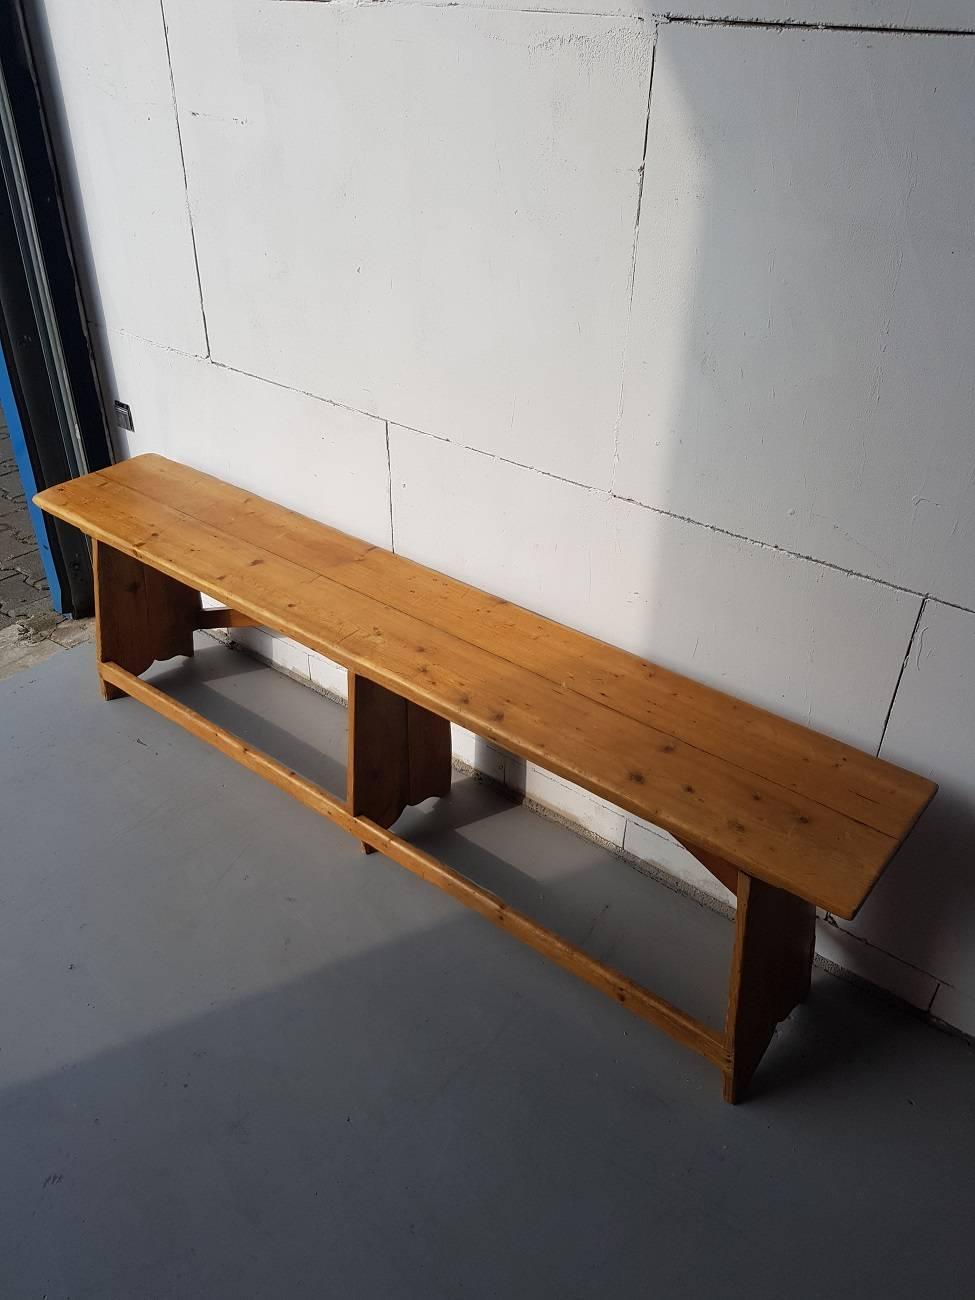 Very beautiful 19th century pinewood bench from the Netherlands with a foot bar at the front.

The measurements are,
Depth 31 cm/ 12.2 inch.
Width 180 cm/ 70.8 inch.
Height 51 cm/ 20 inch.
      